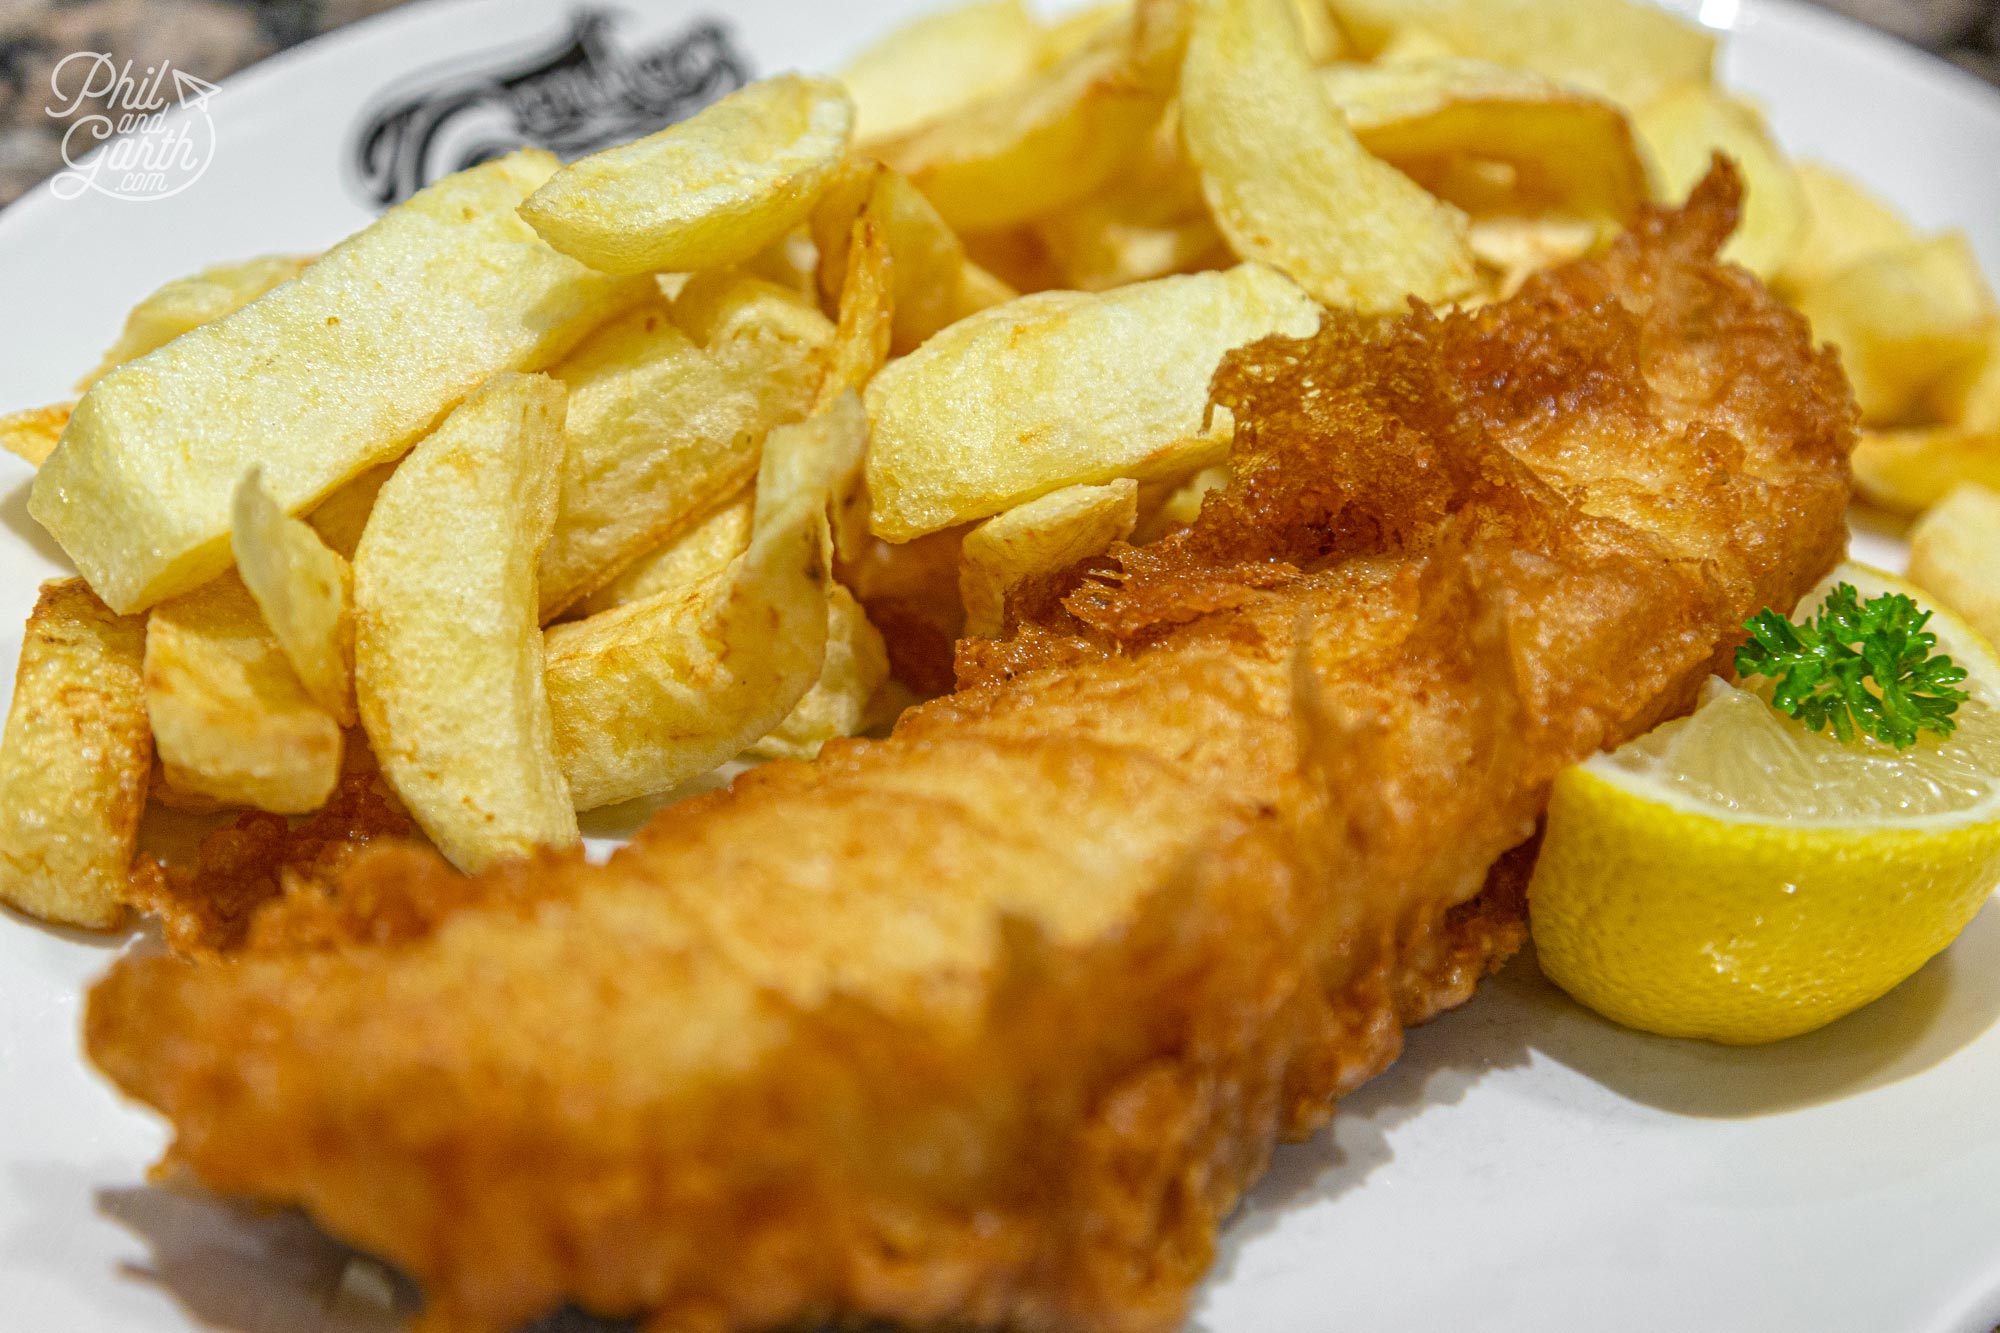 Our award for the best fish and chips in Whitby goes to Trenchers